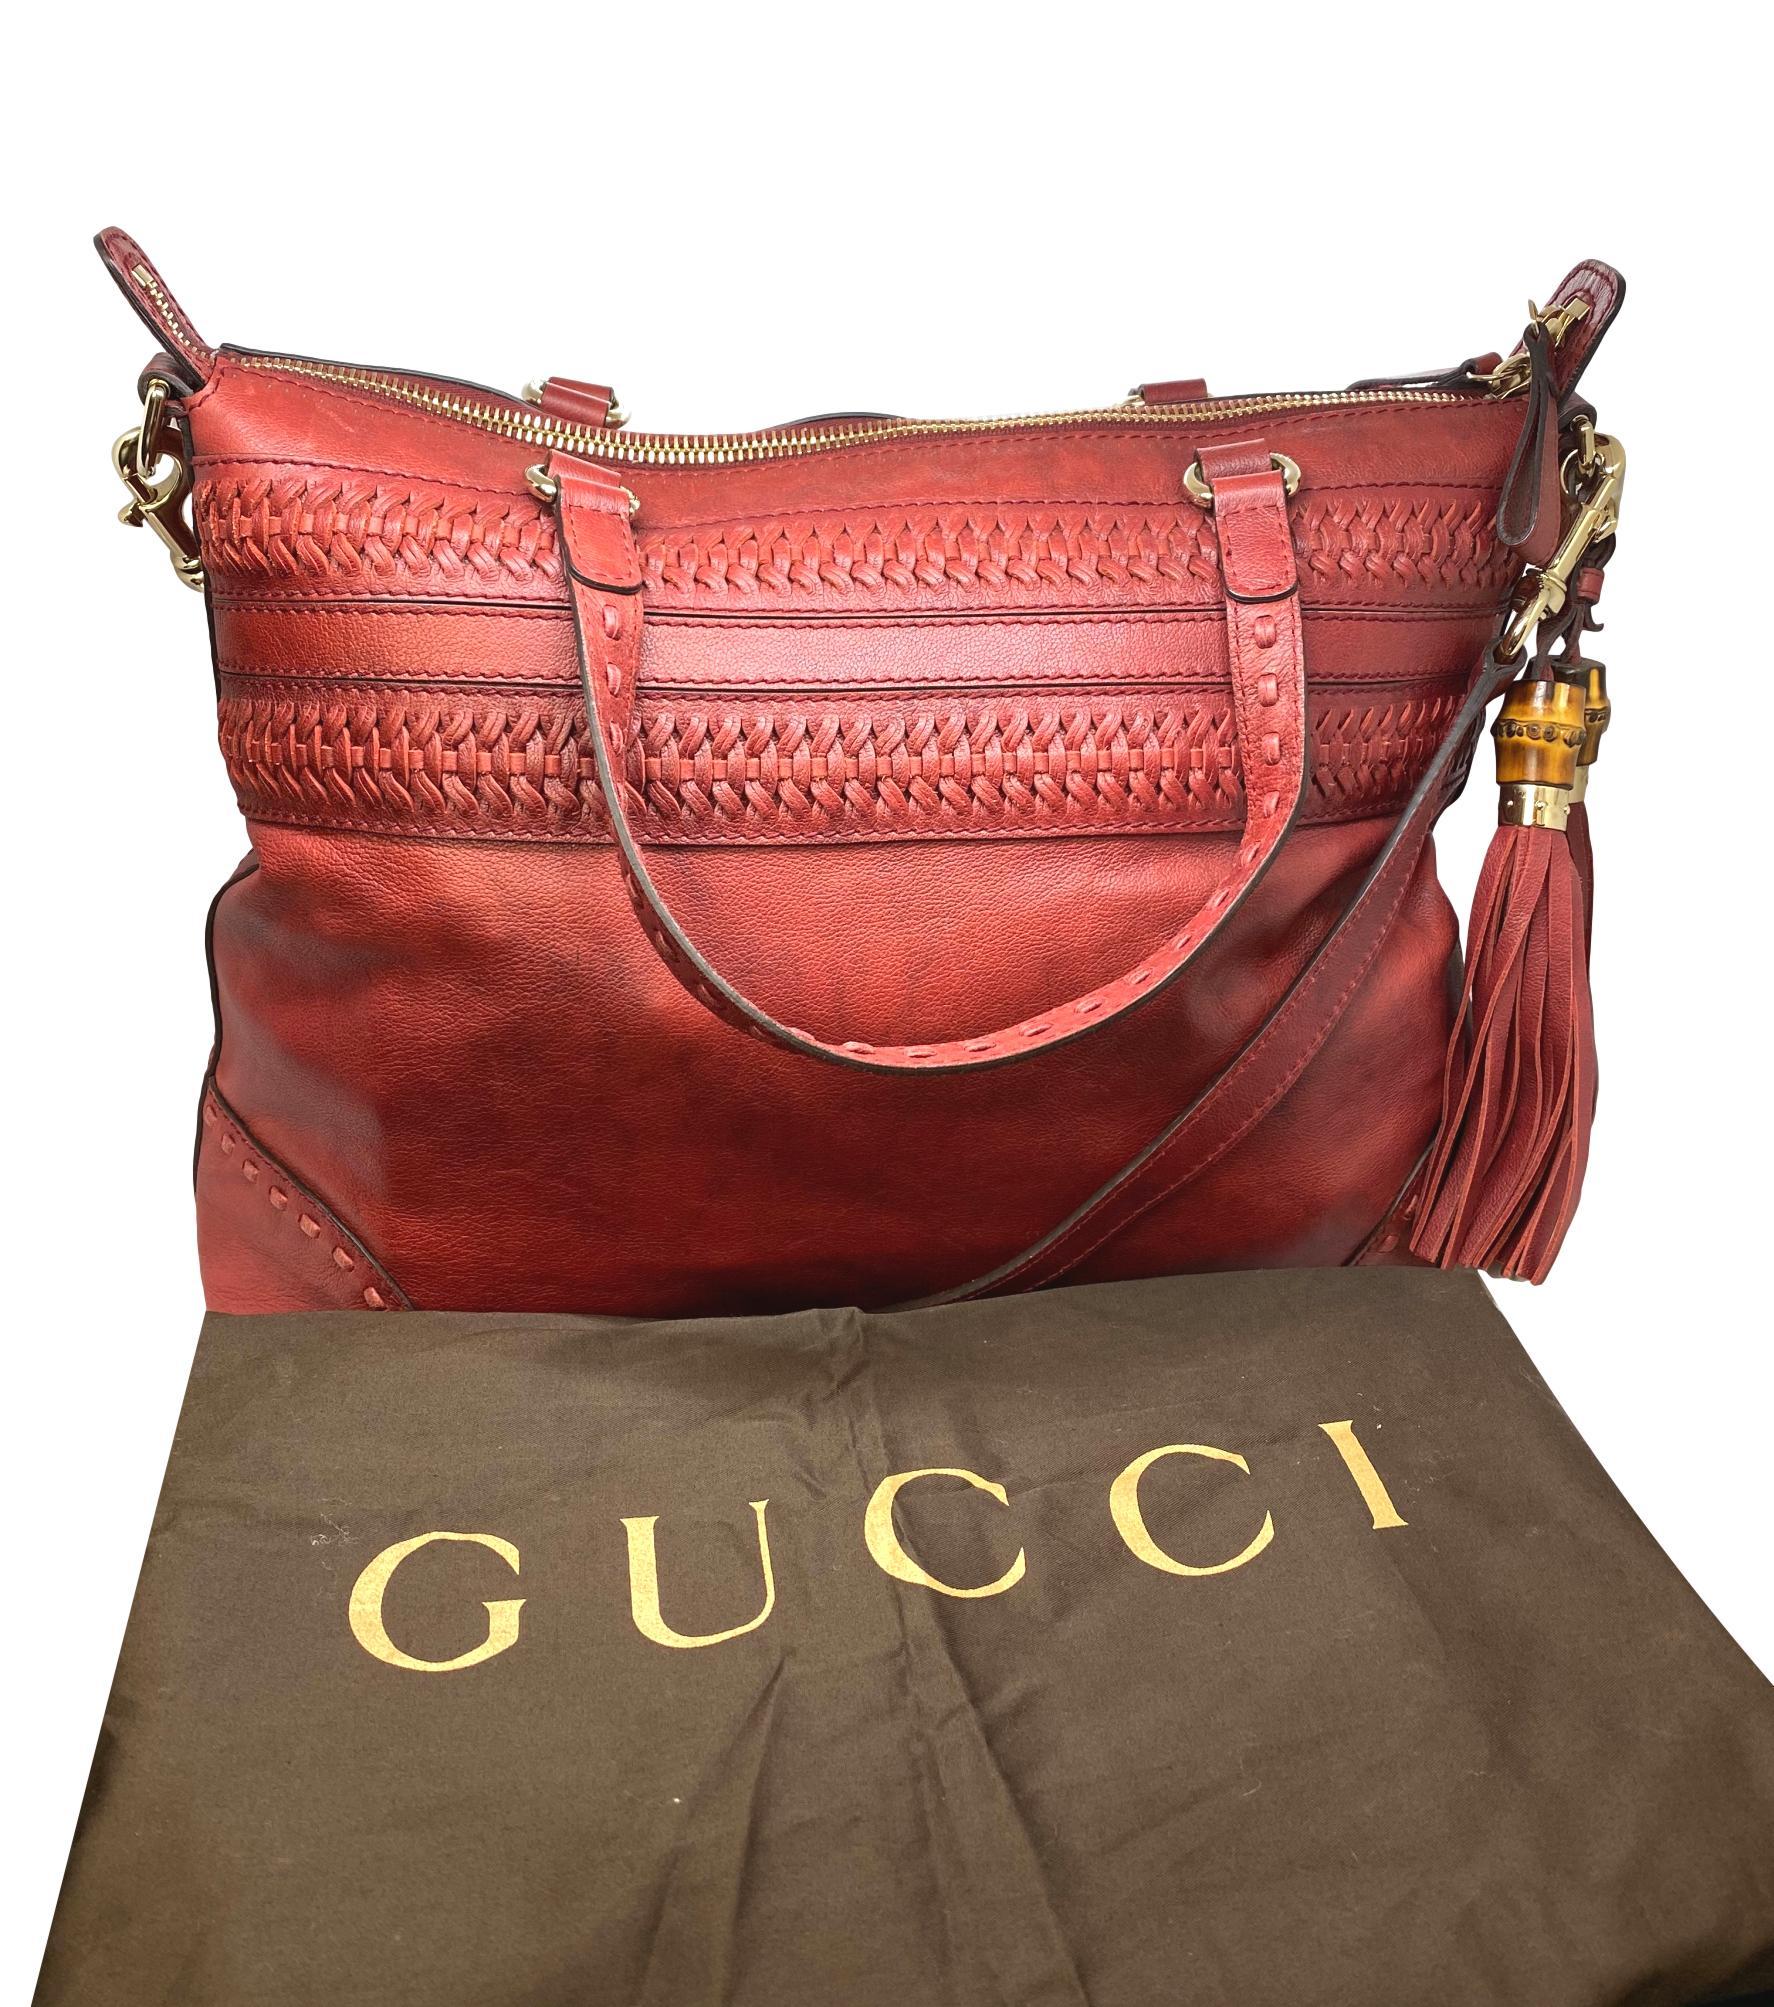 Limited Edition Gucci Green Carpet Challenge Red Leather Shoulder Tote Bag, 2005. In the early 2000's, Gucci partnered with 